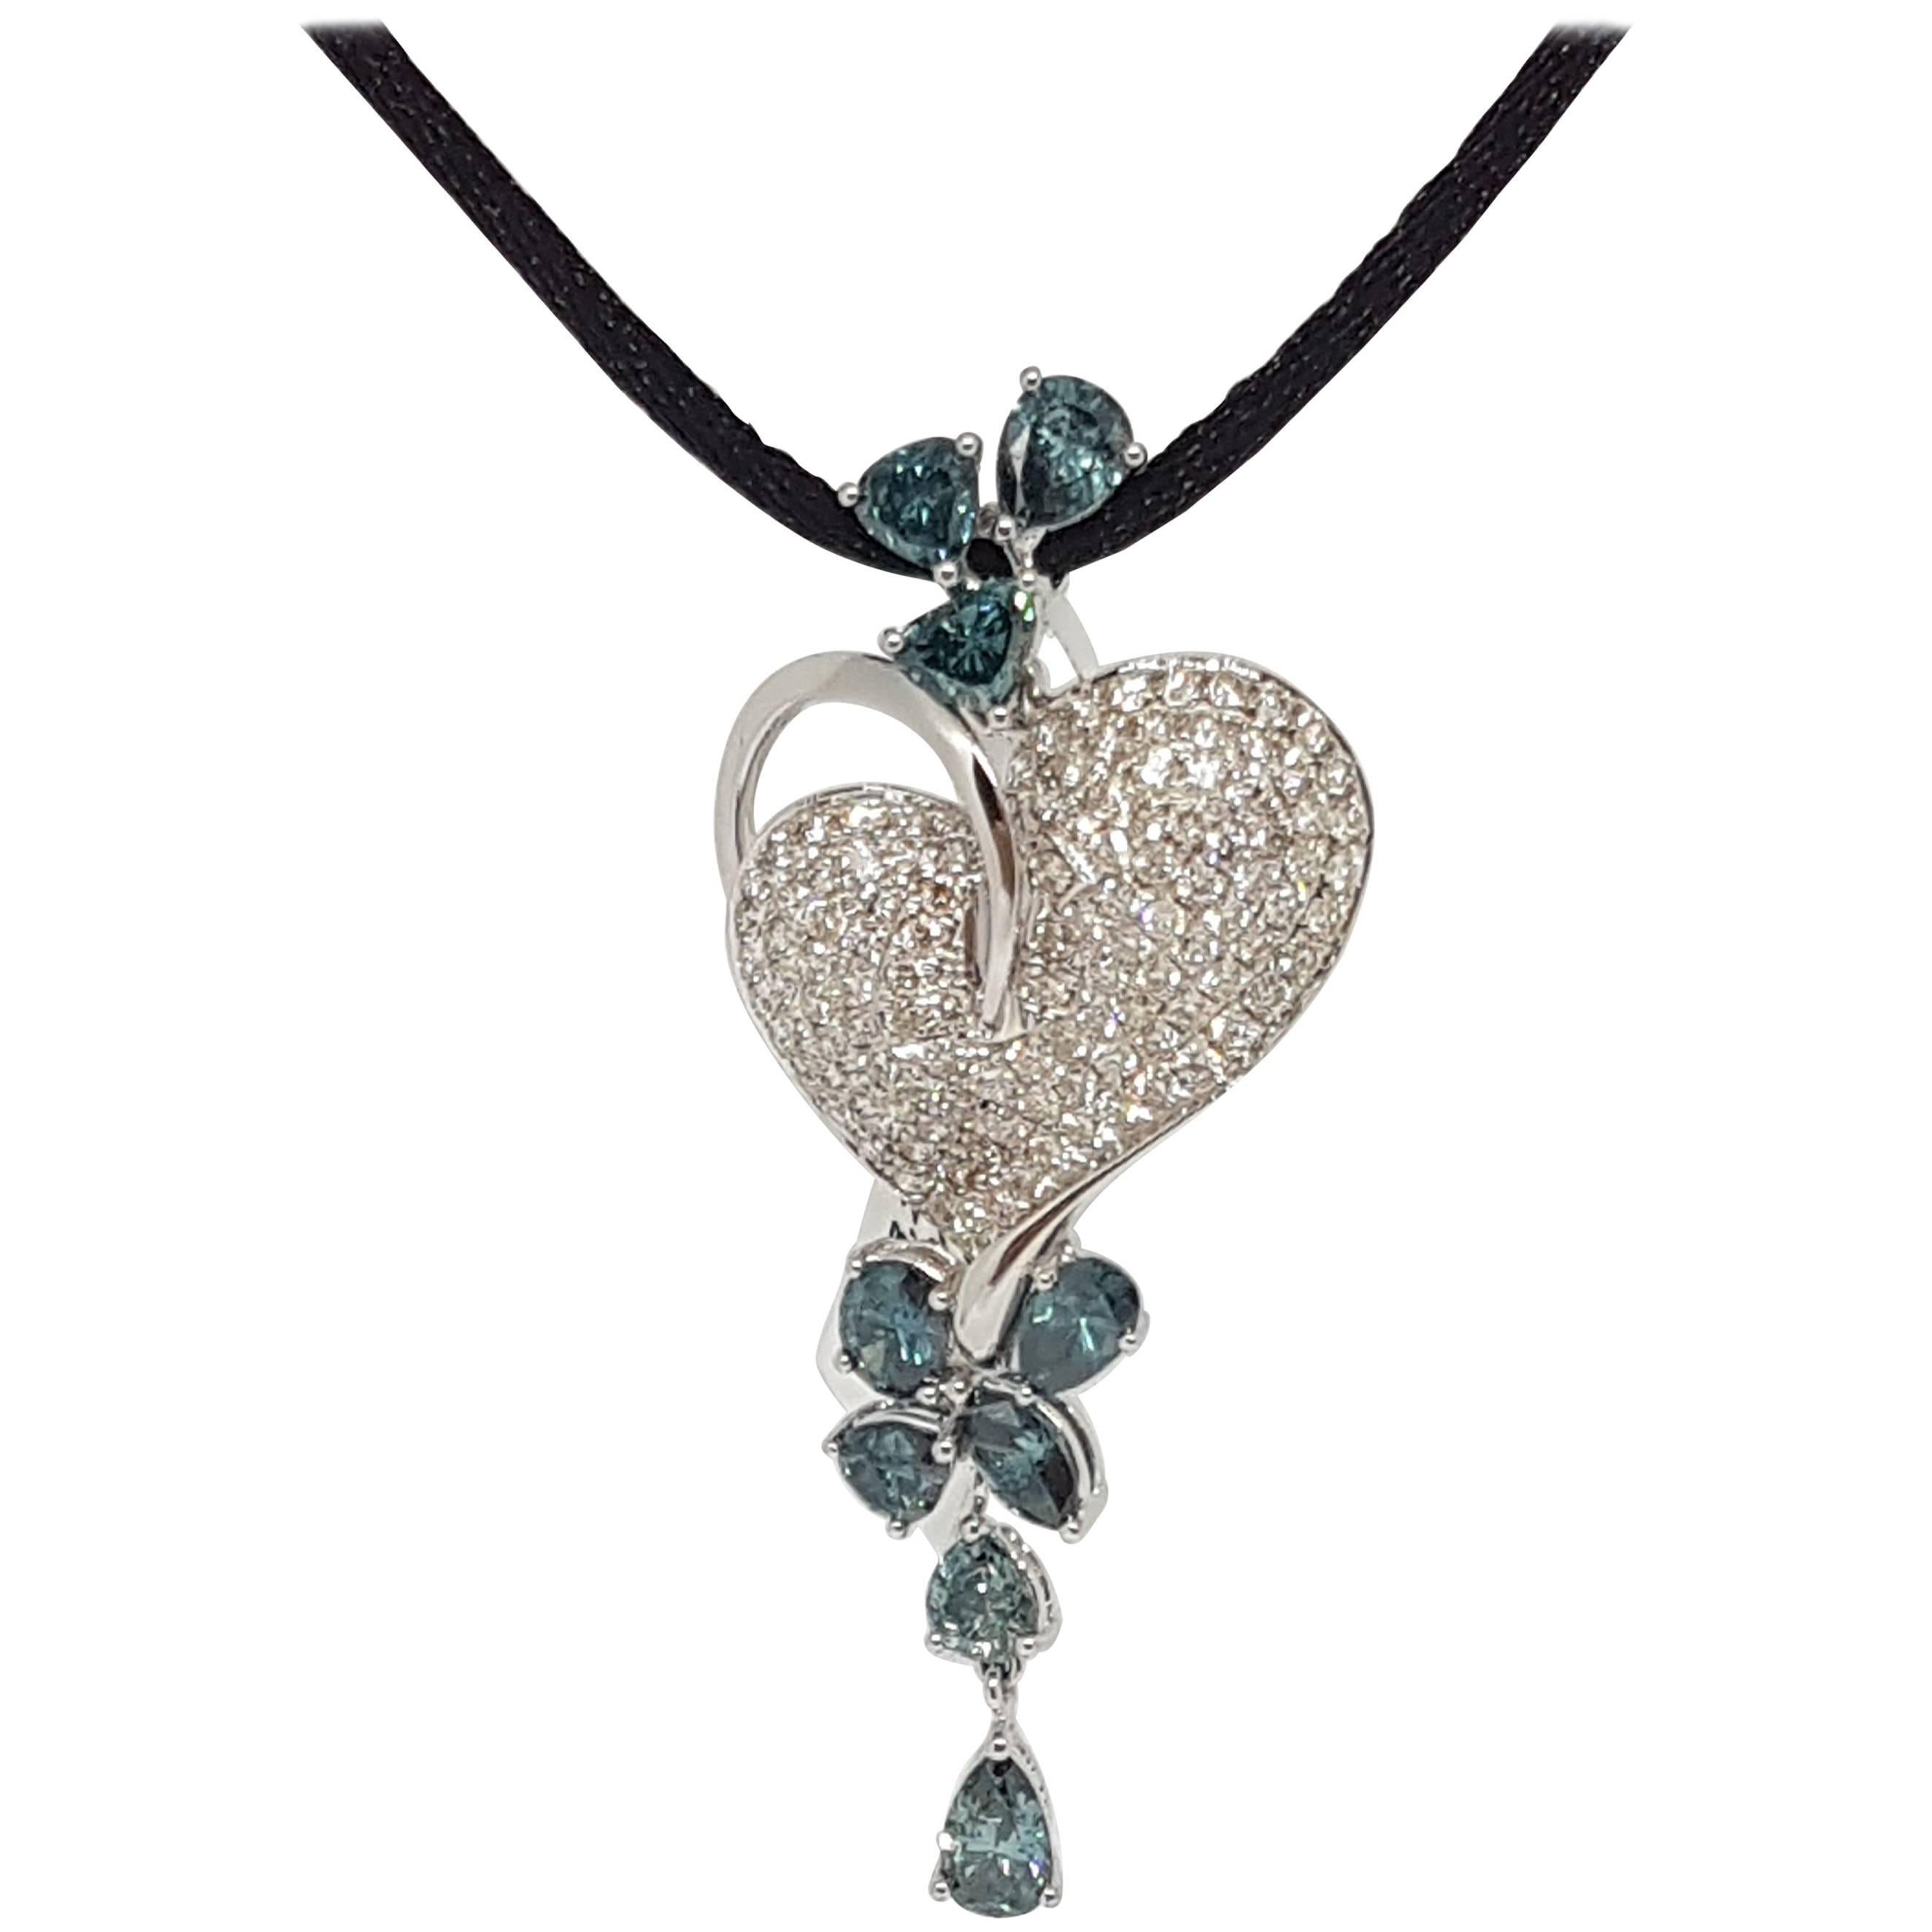 Blue Diamonds Hanging in Heart shape Necklace in White Gold